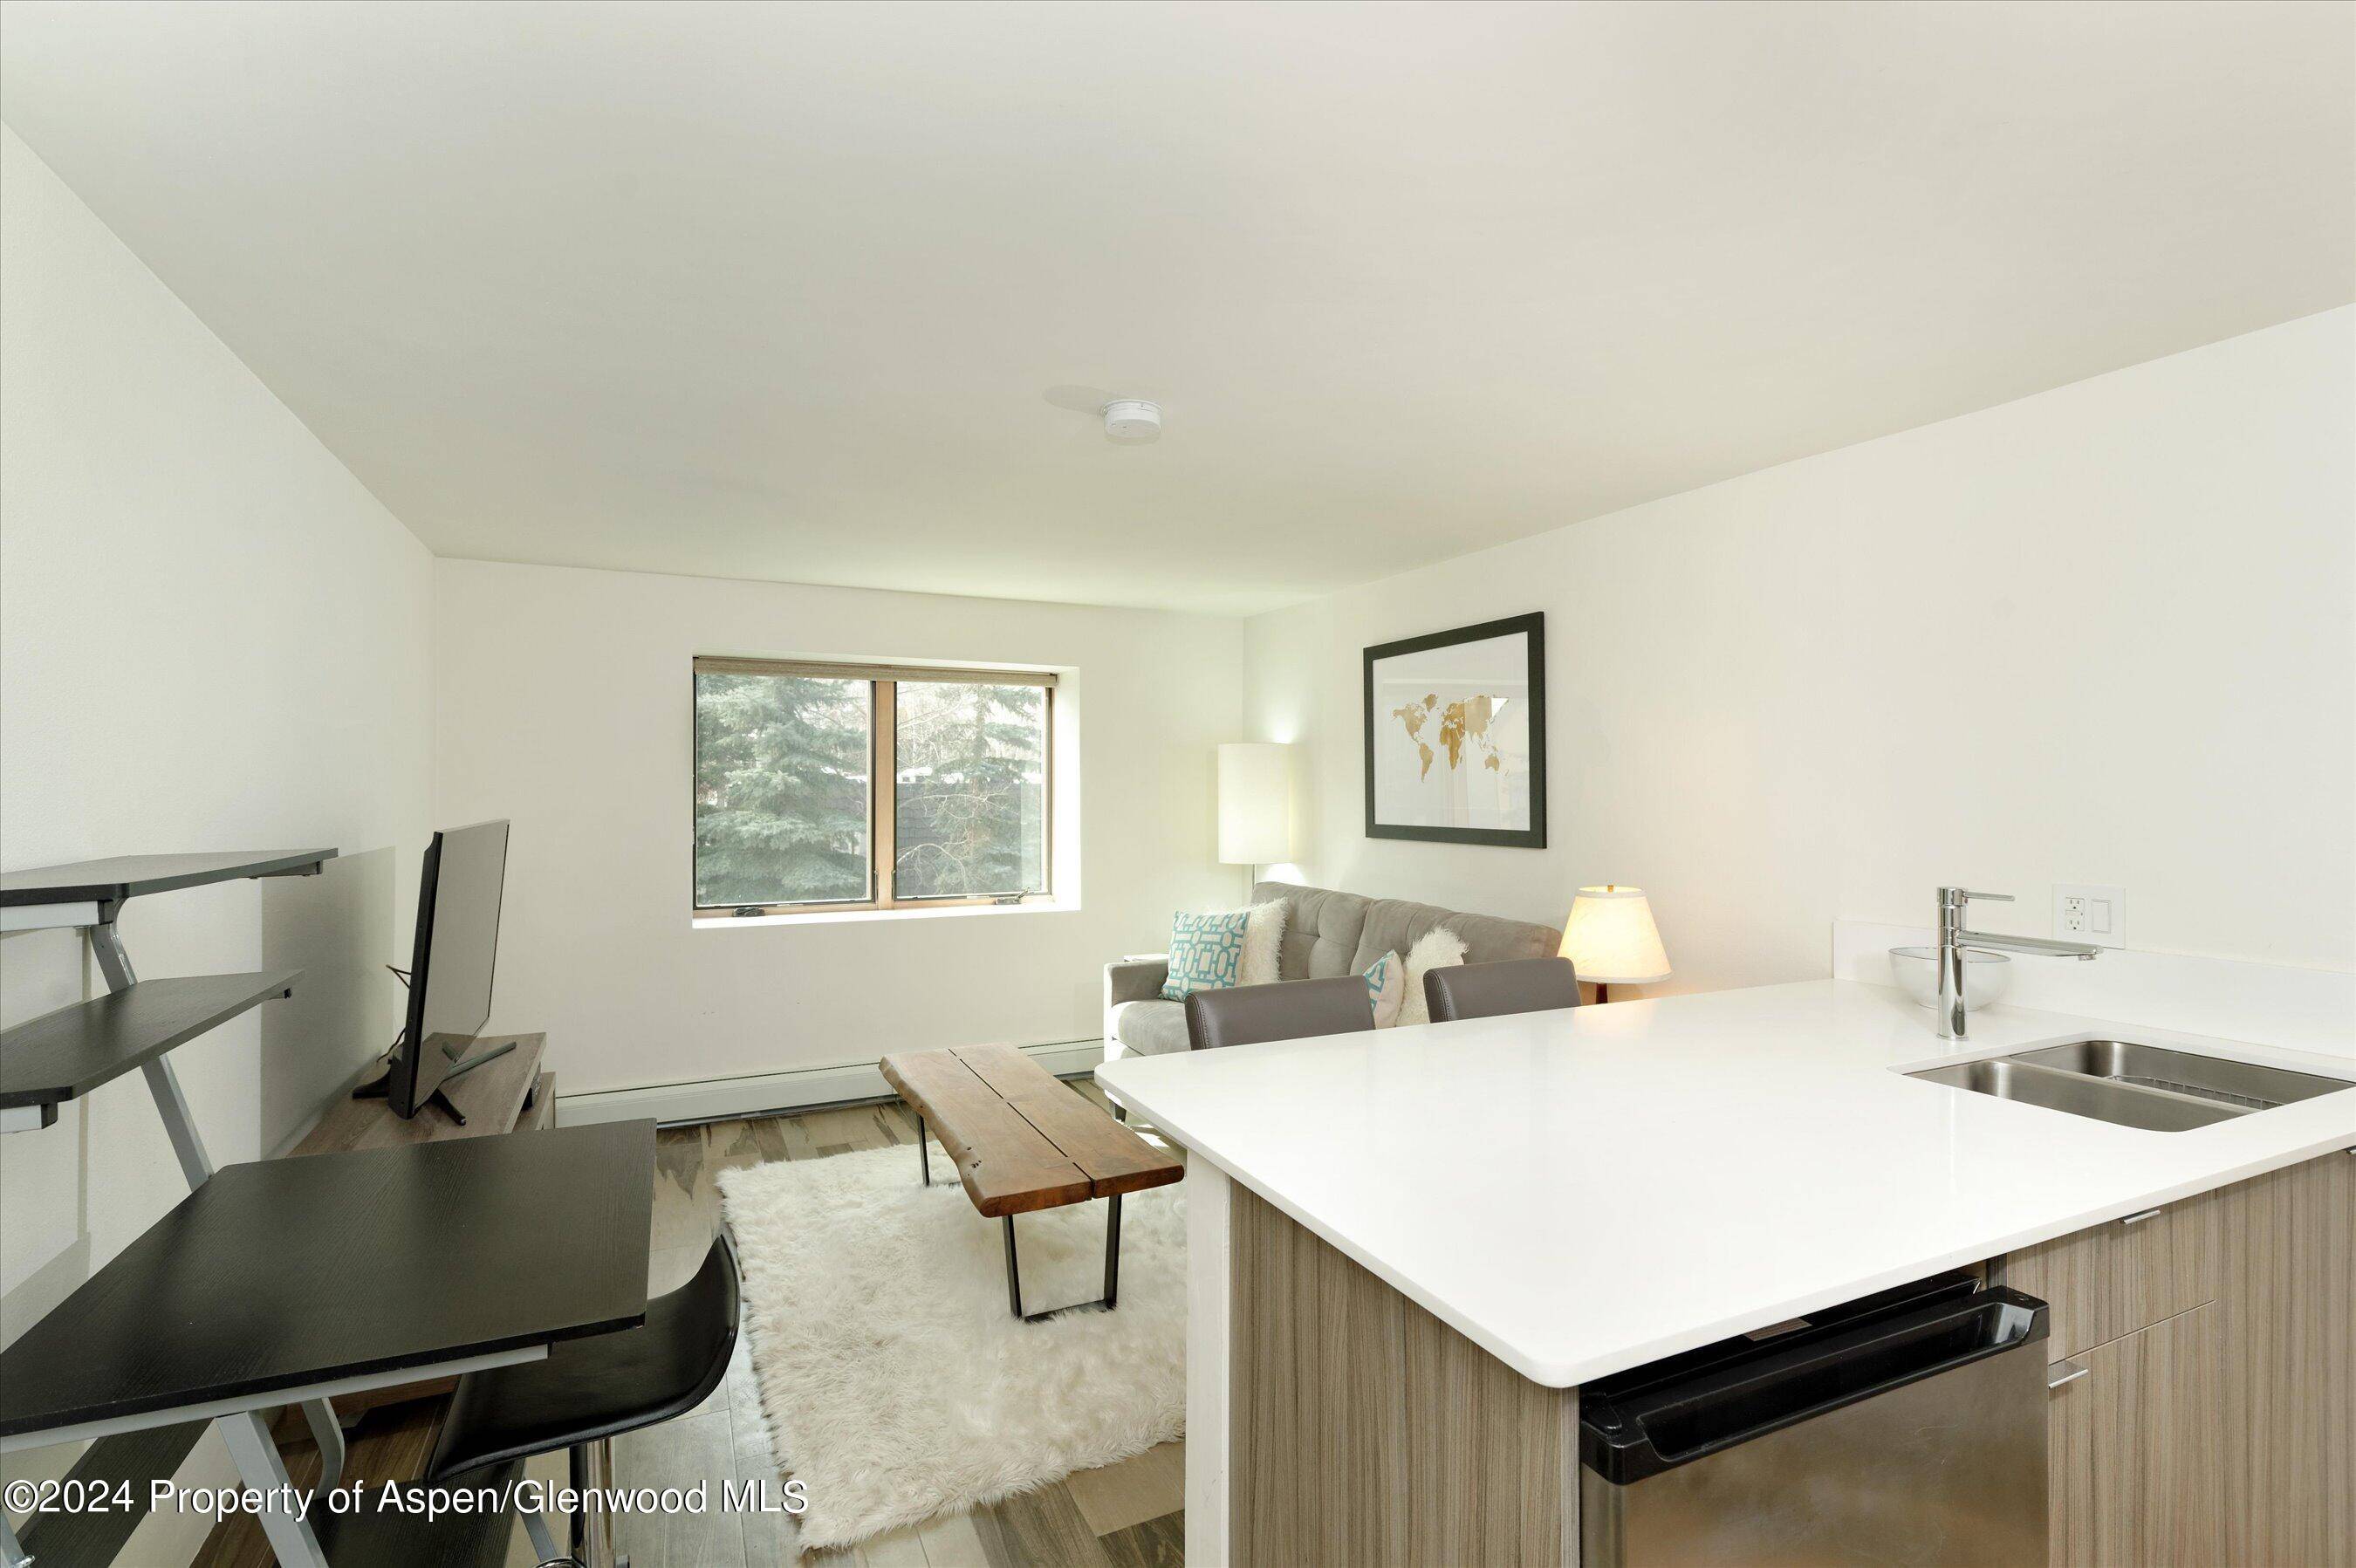 The Best Studio Apartment in Winfield Arms offers unparalleled convenience and comfort in the heart of Aspen.